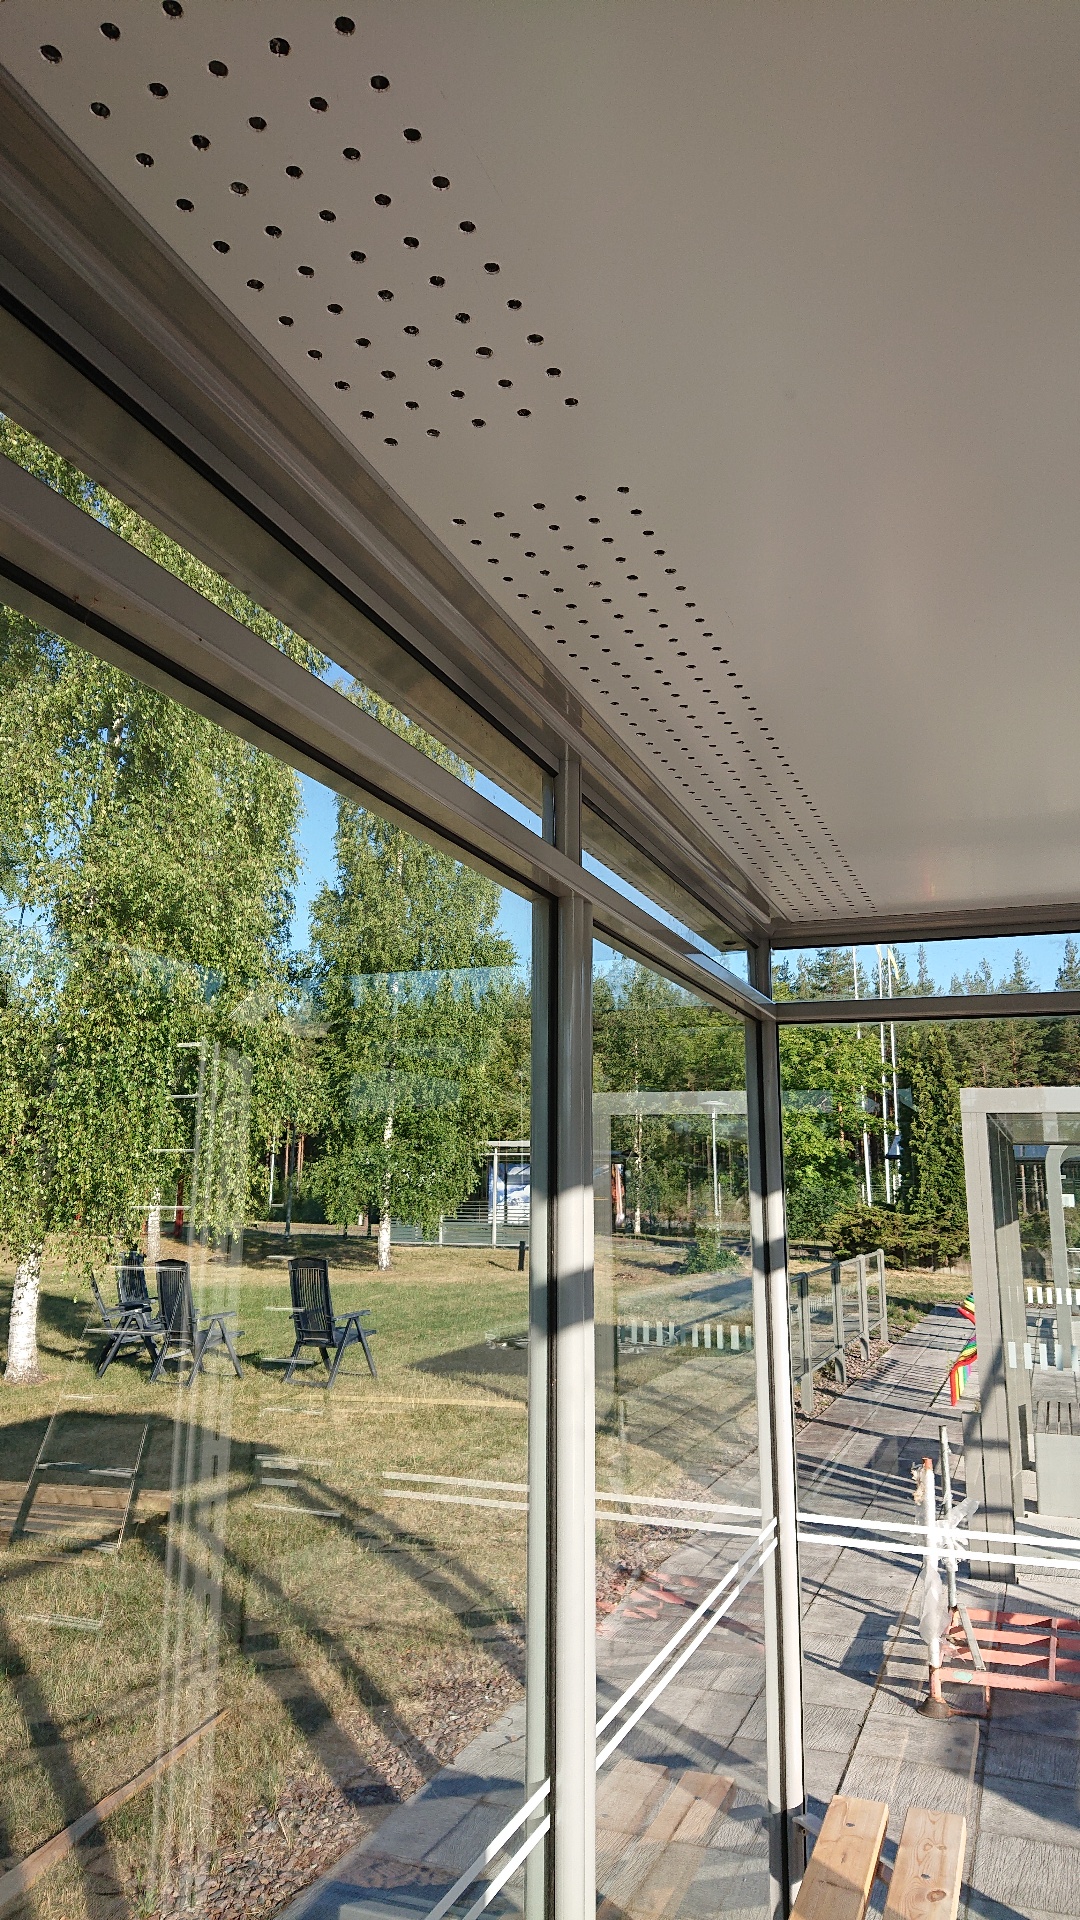 Camfil's CC 400 concealed air filters draw contaminated air into the roof of the bus shelter and purify the air by up to 85%.